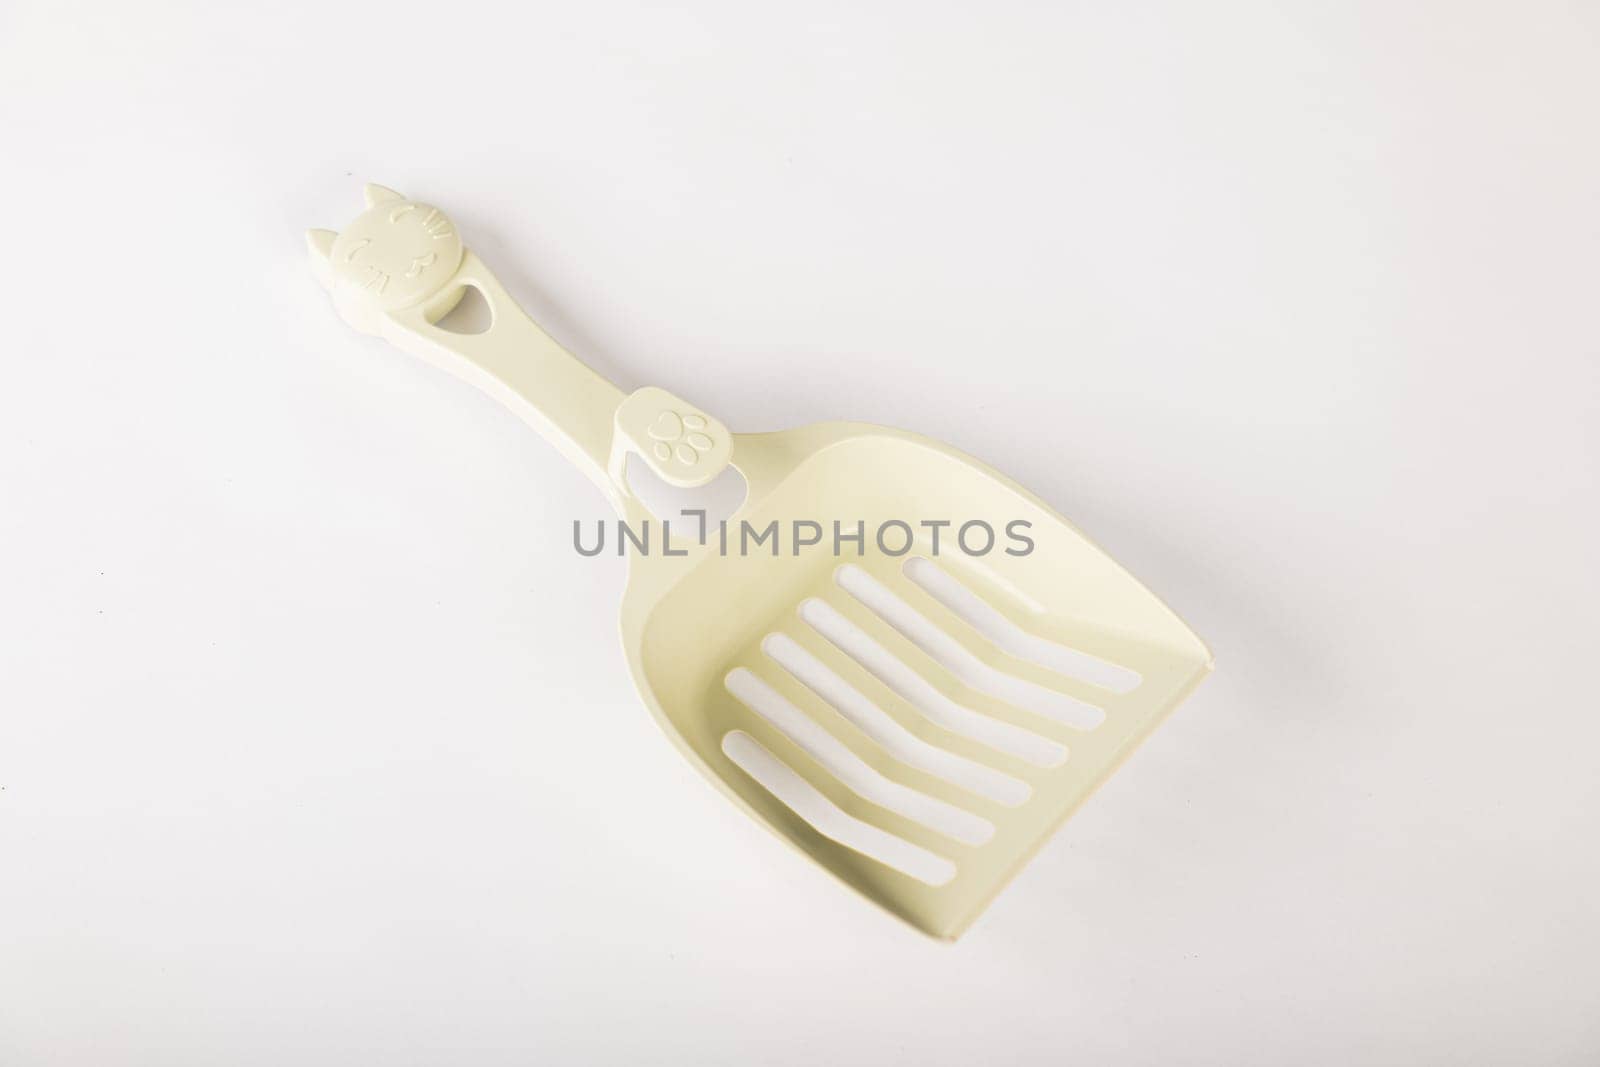 Maintain the purity of your cat's litter box with isolated metal cat litter scoops on a white background. It's all about care hygiene and cleanliness for your feline friend. by Sorapop